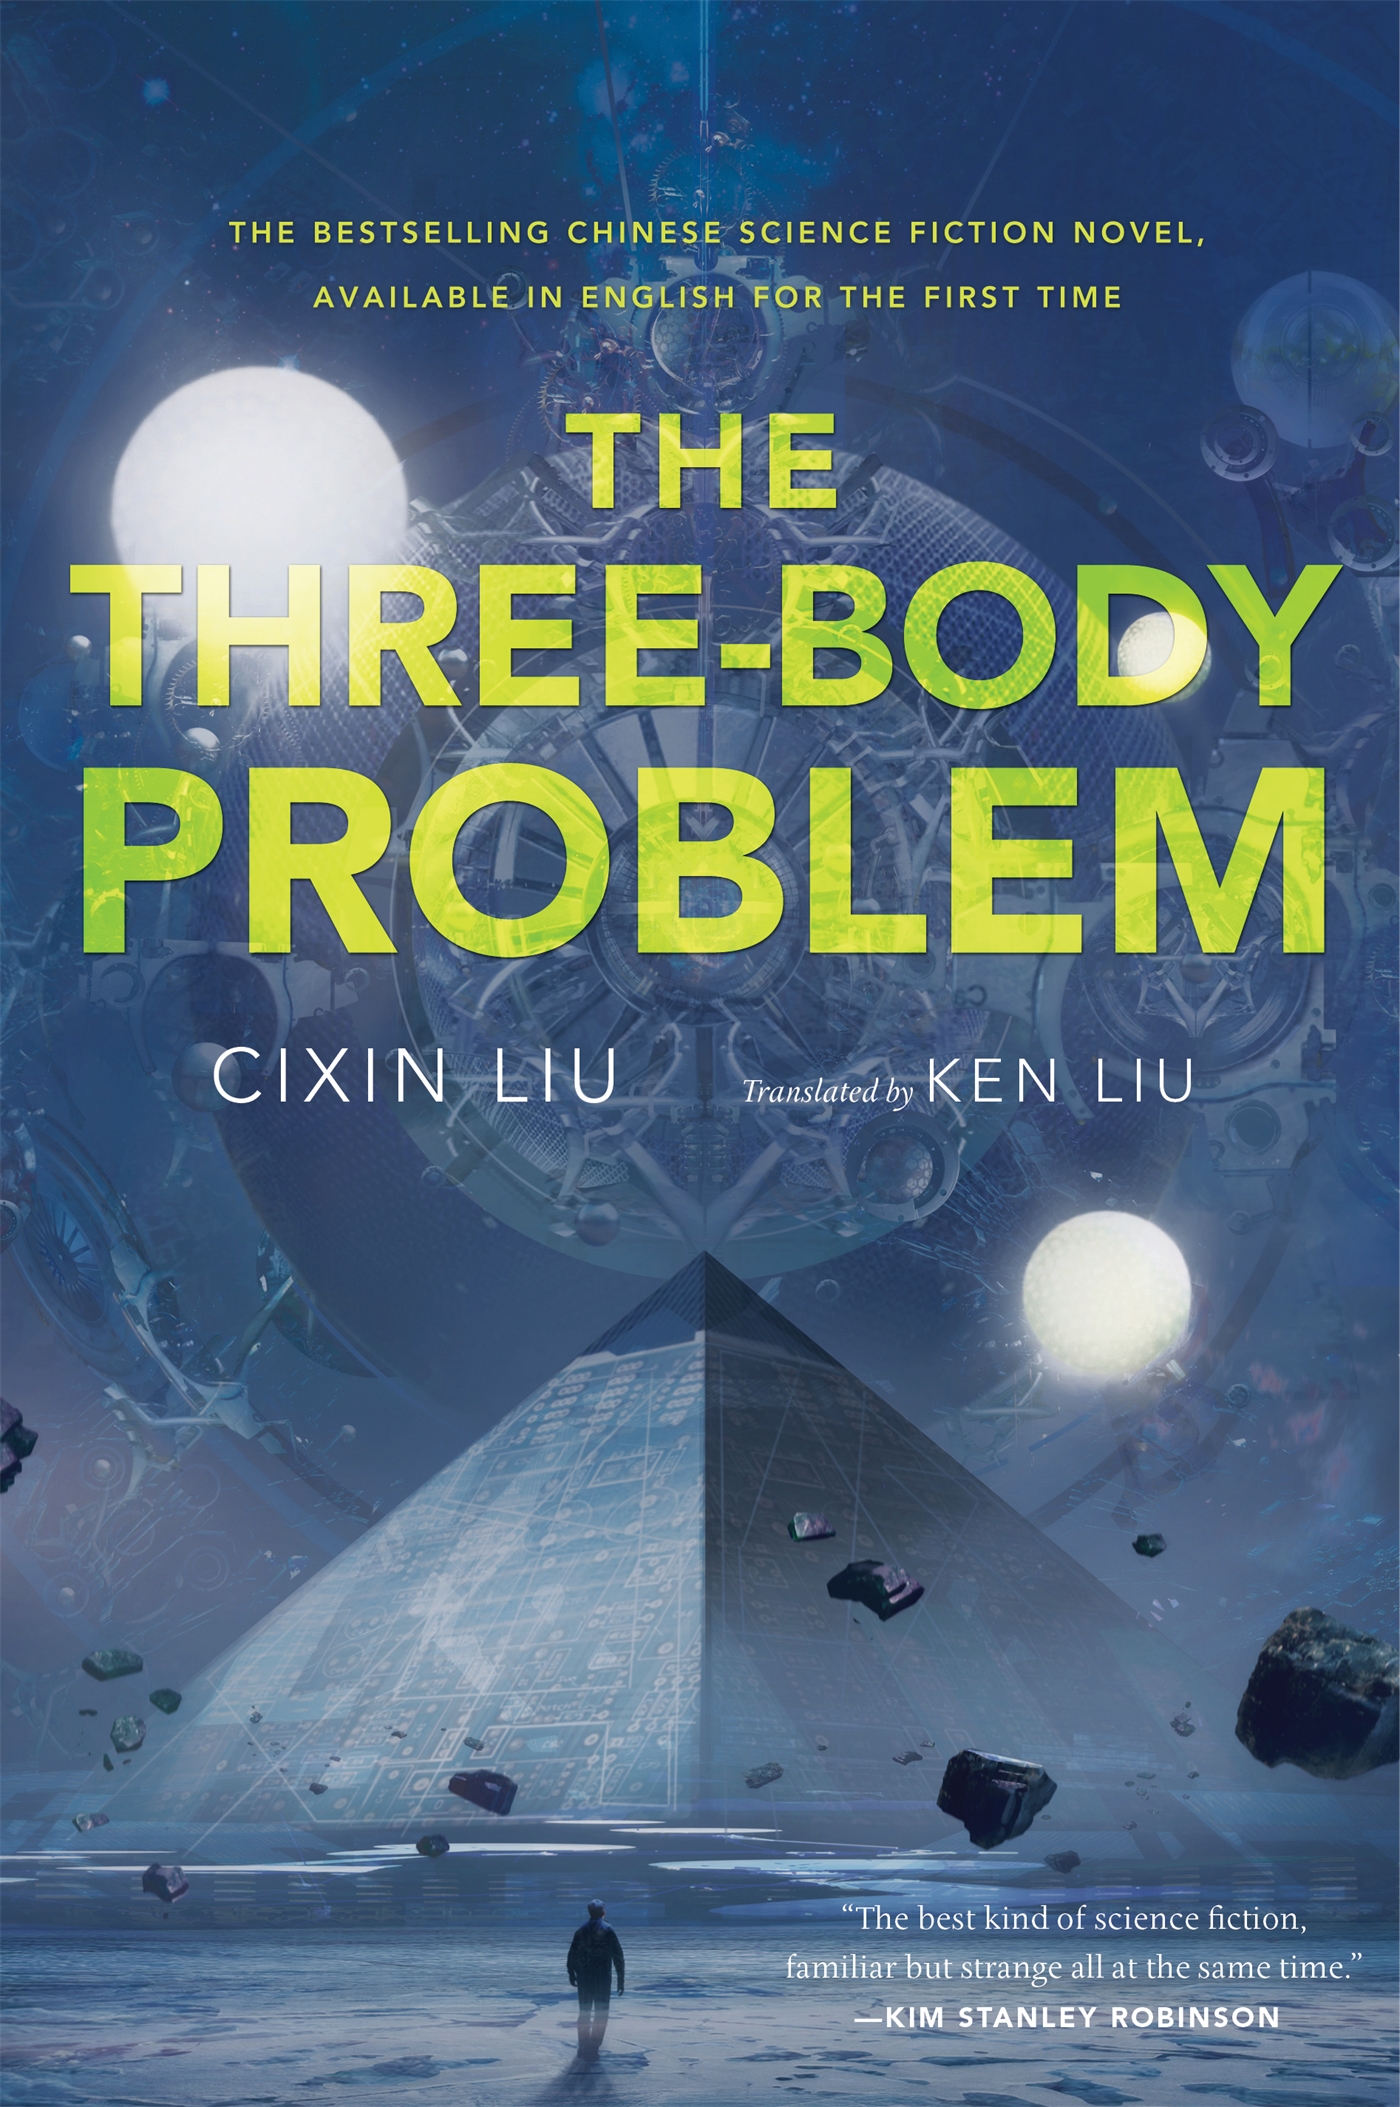 Book cover of The Three-Body Problem.